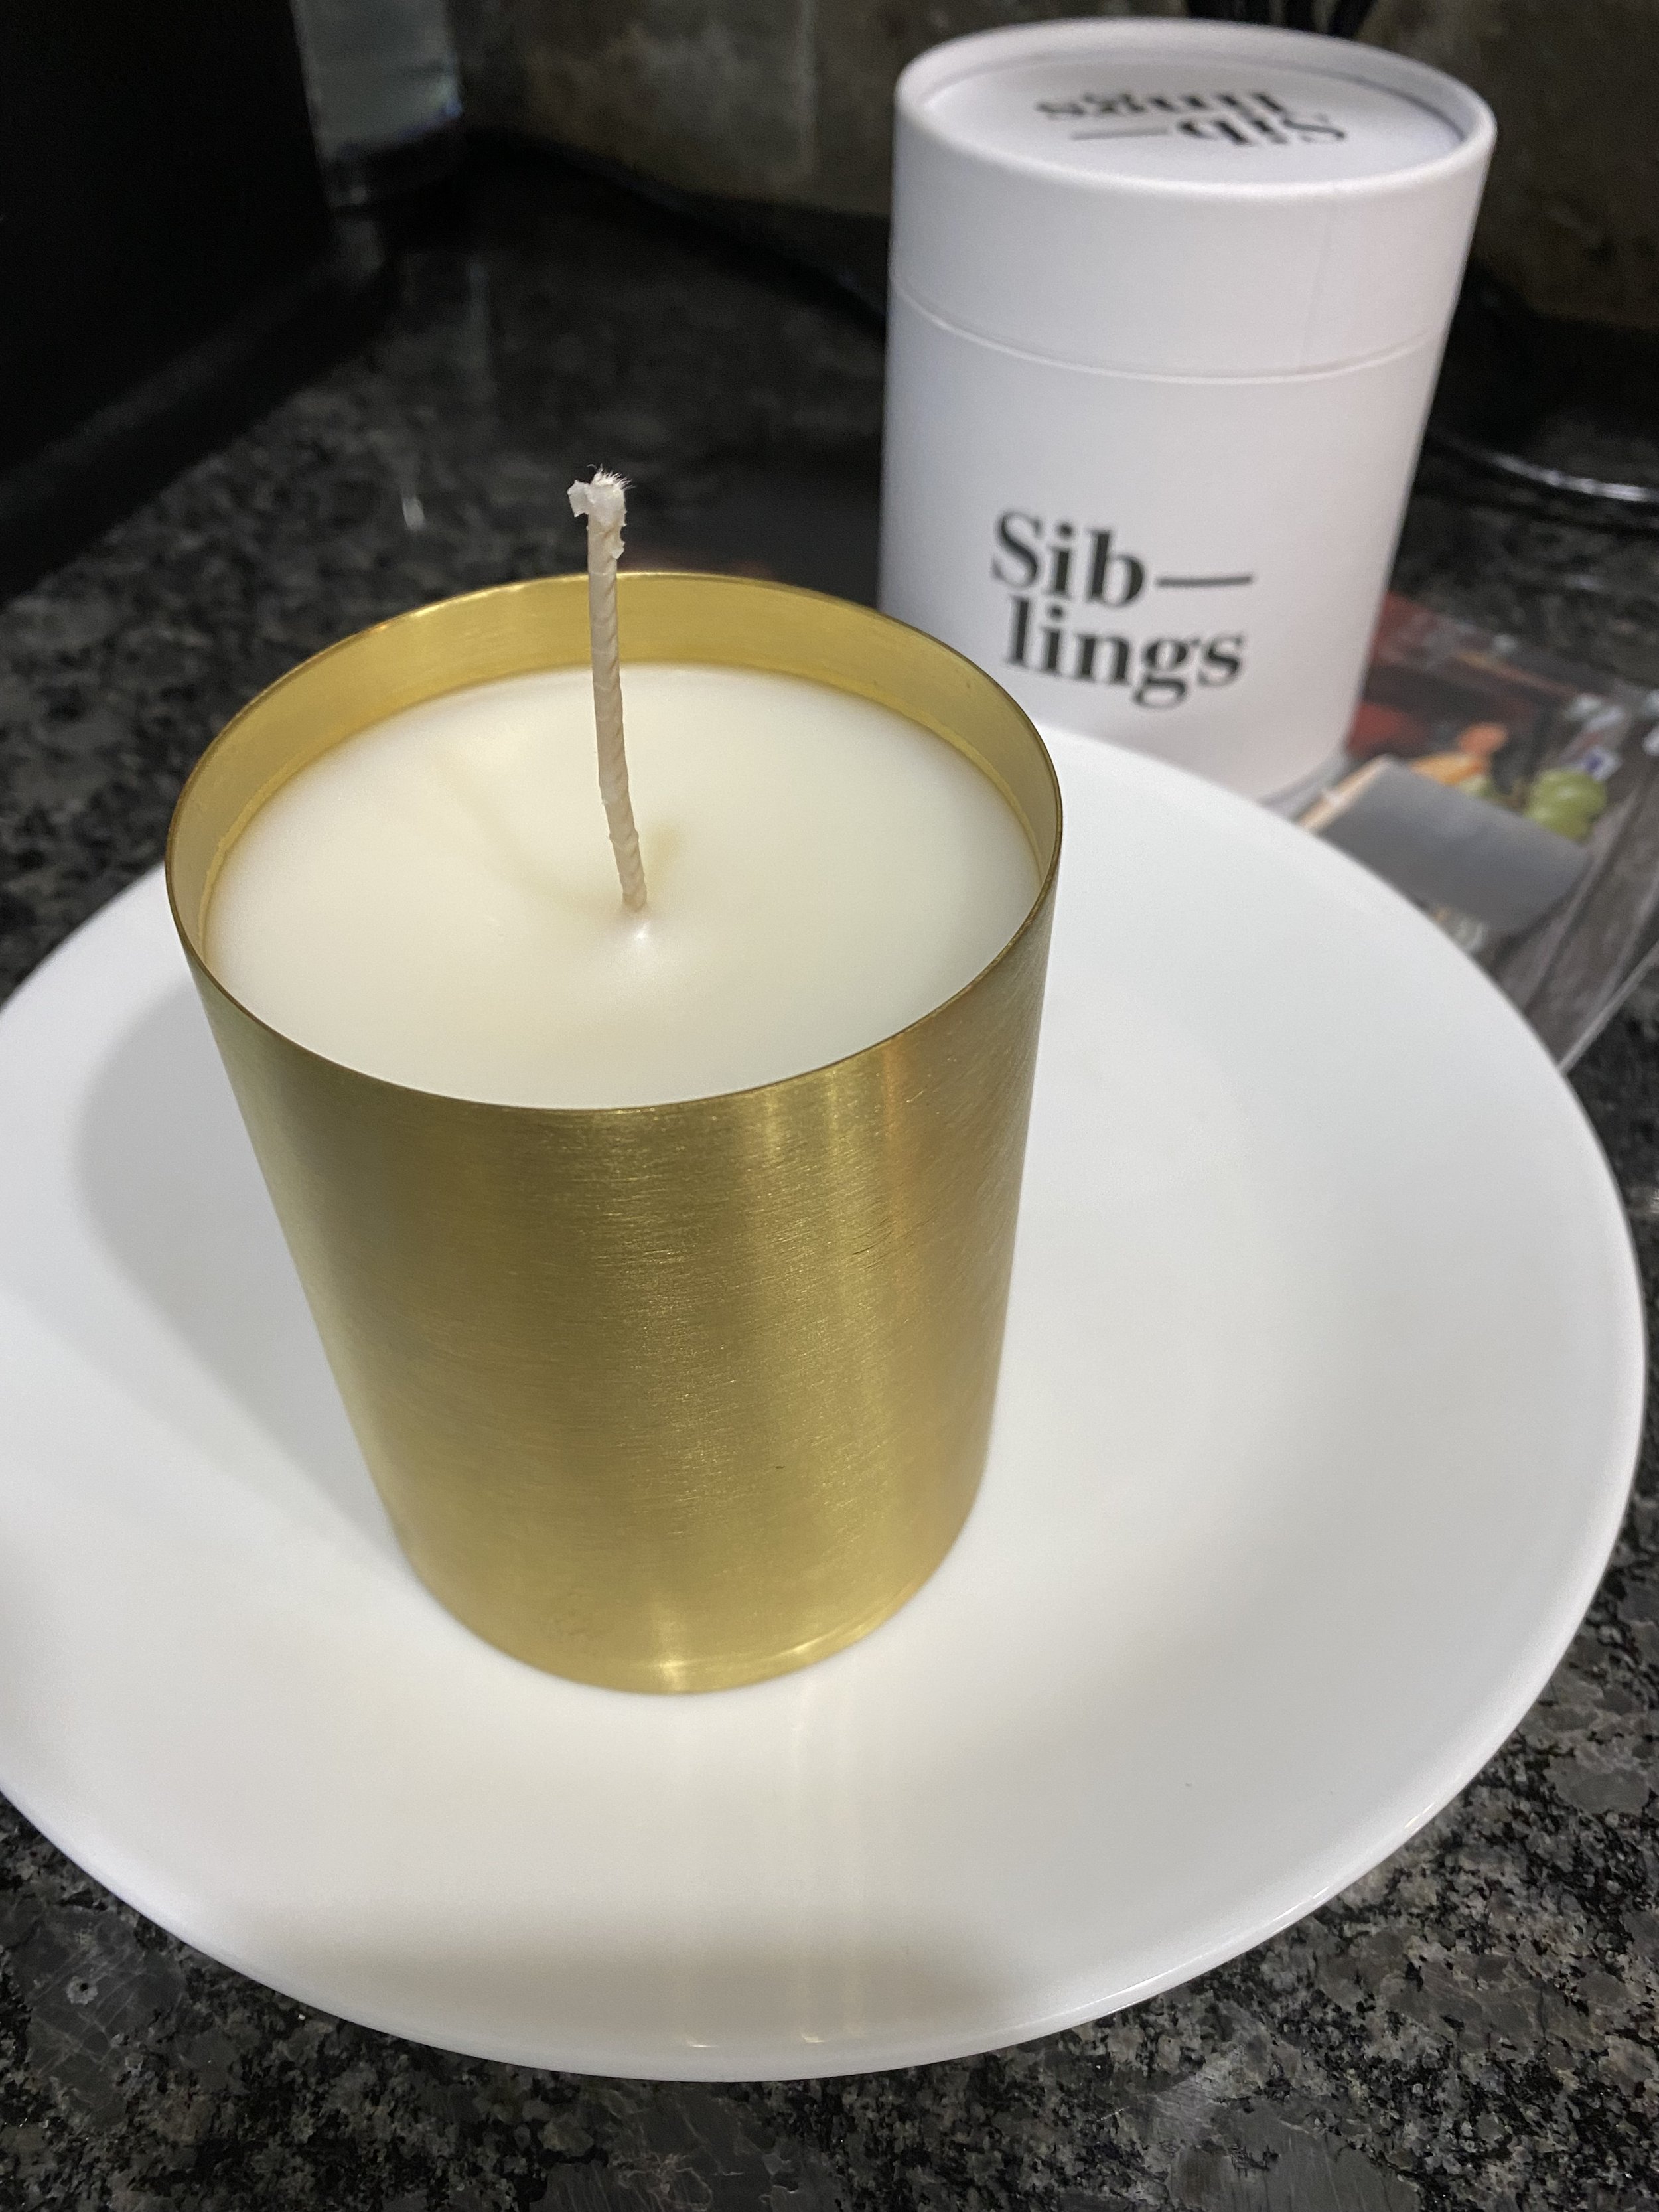 Siblings Candle Review 2021